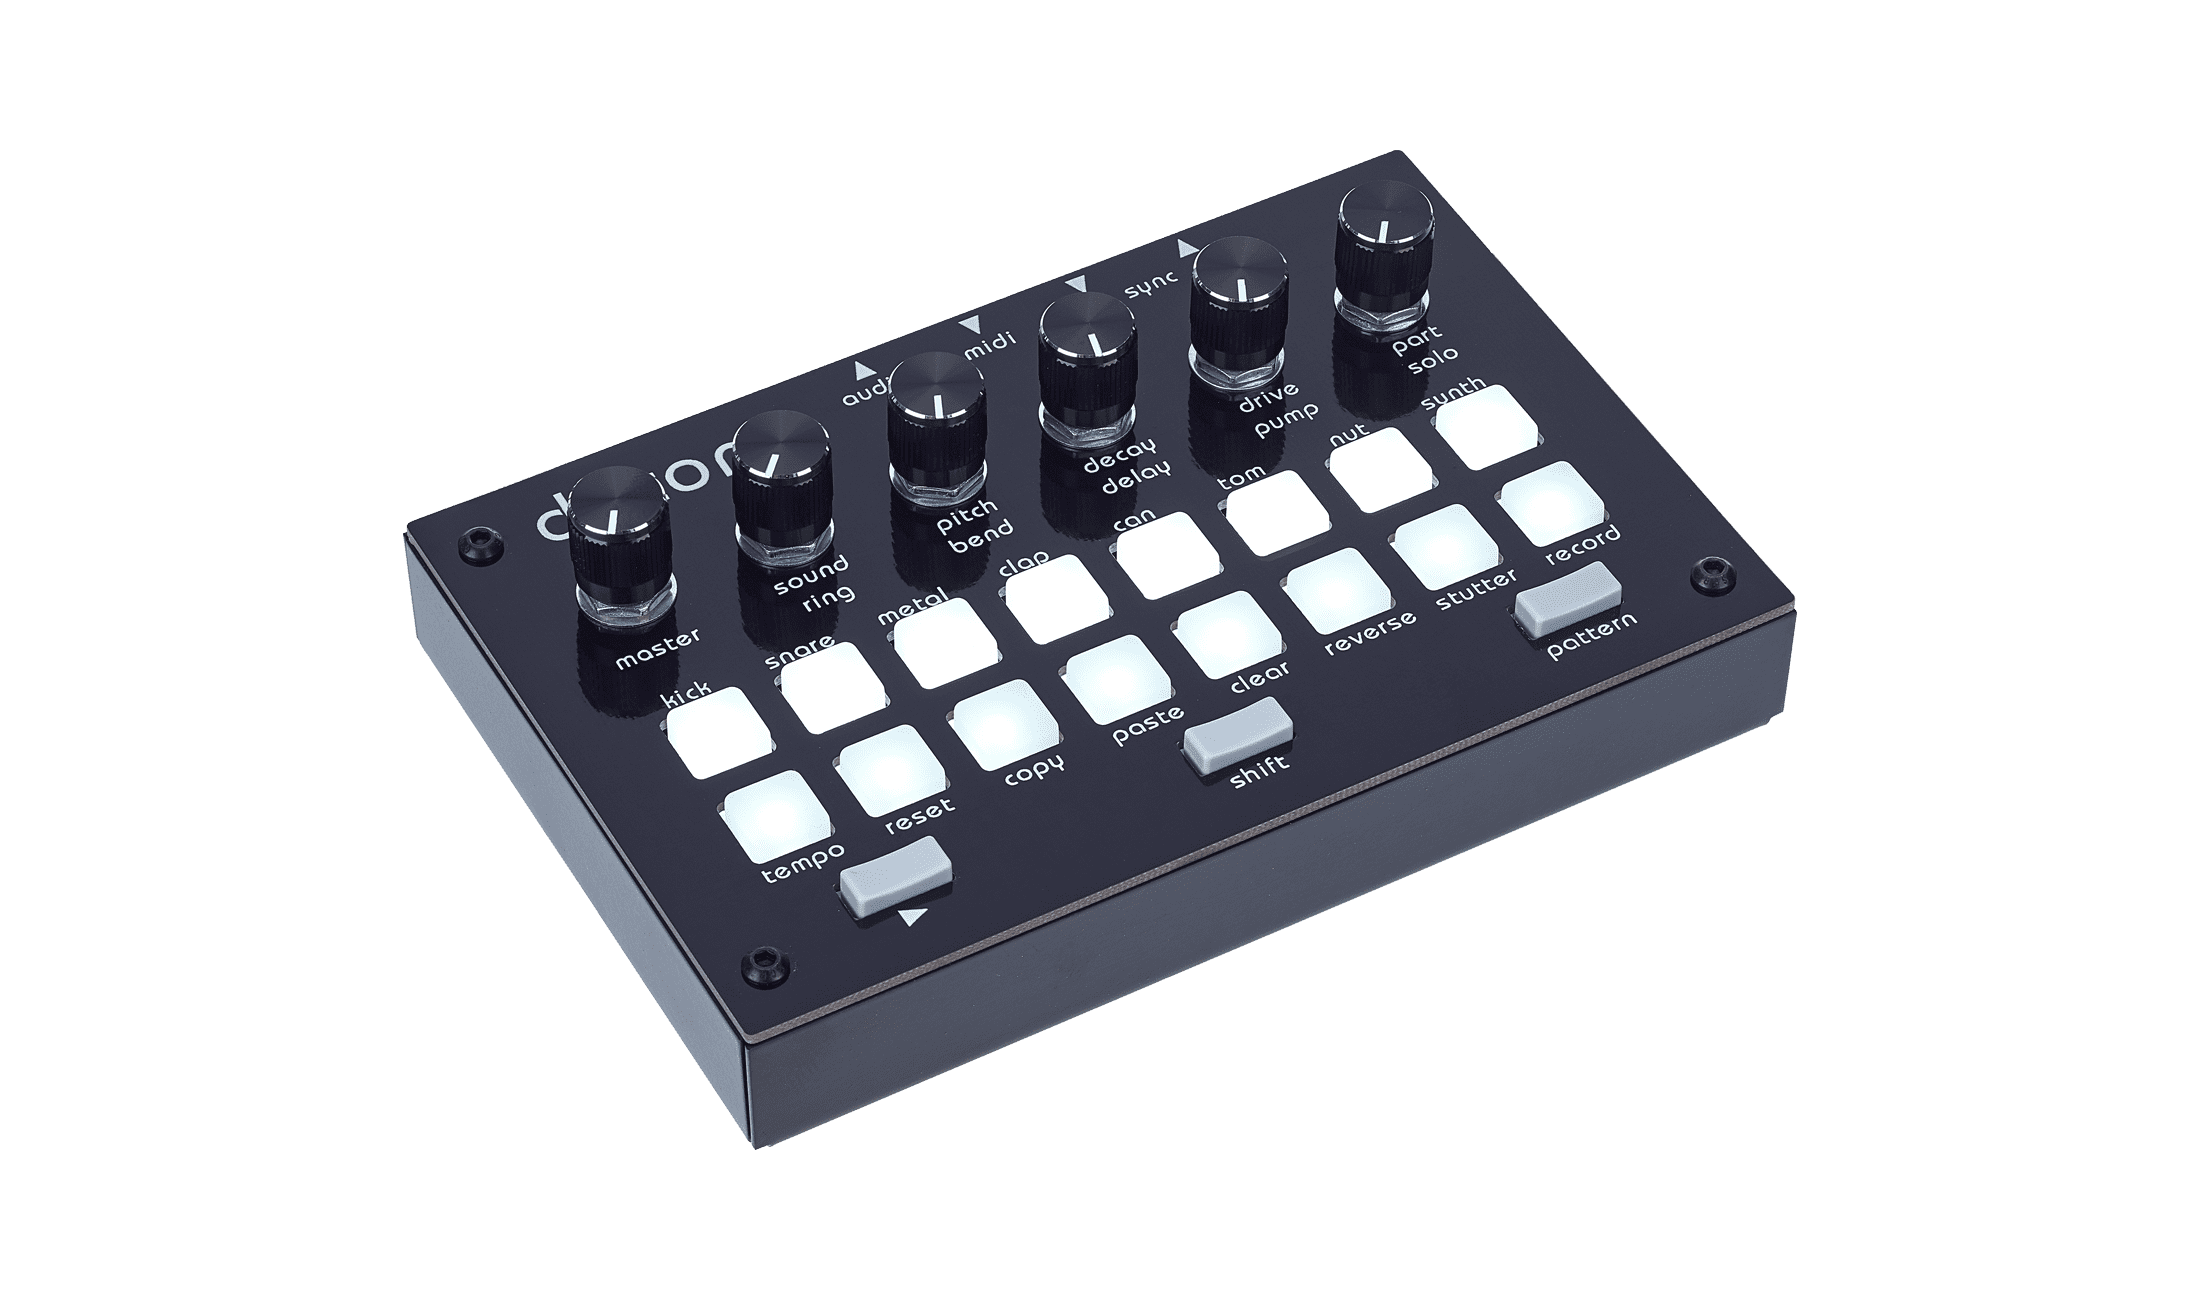 Test: Twisted Electrons Deton8 / Drumsynthesizer